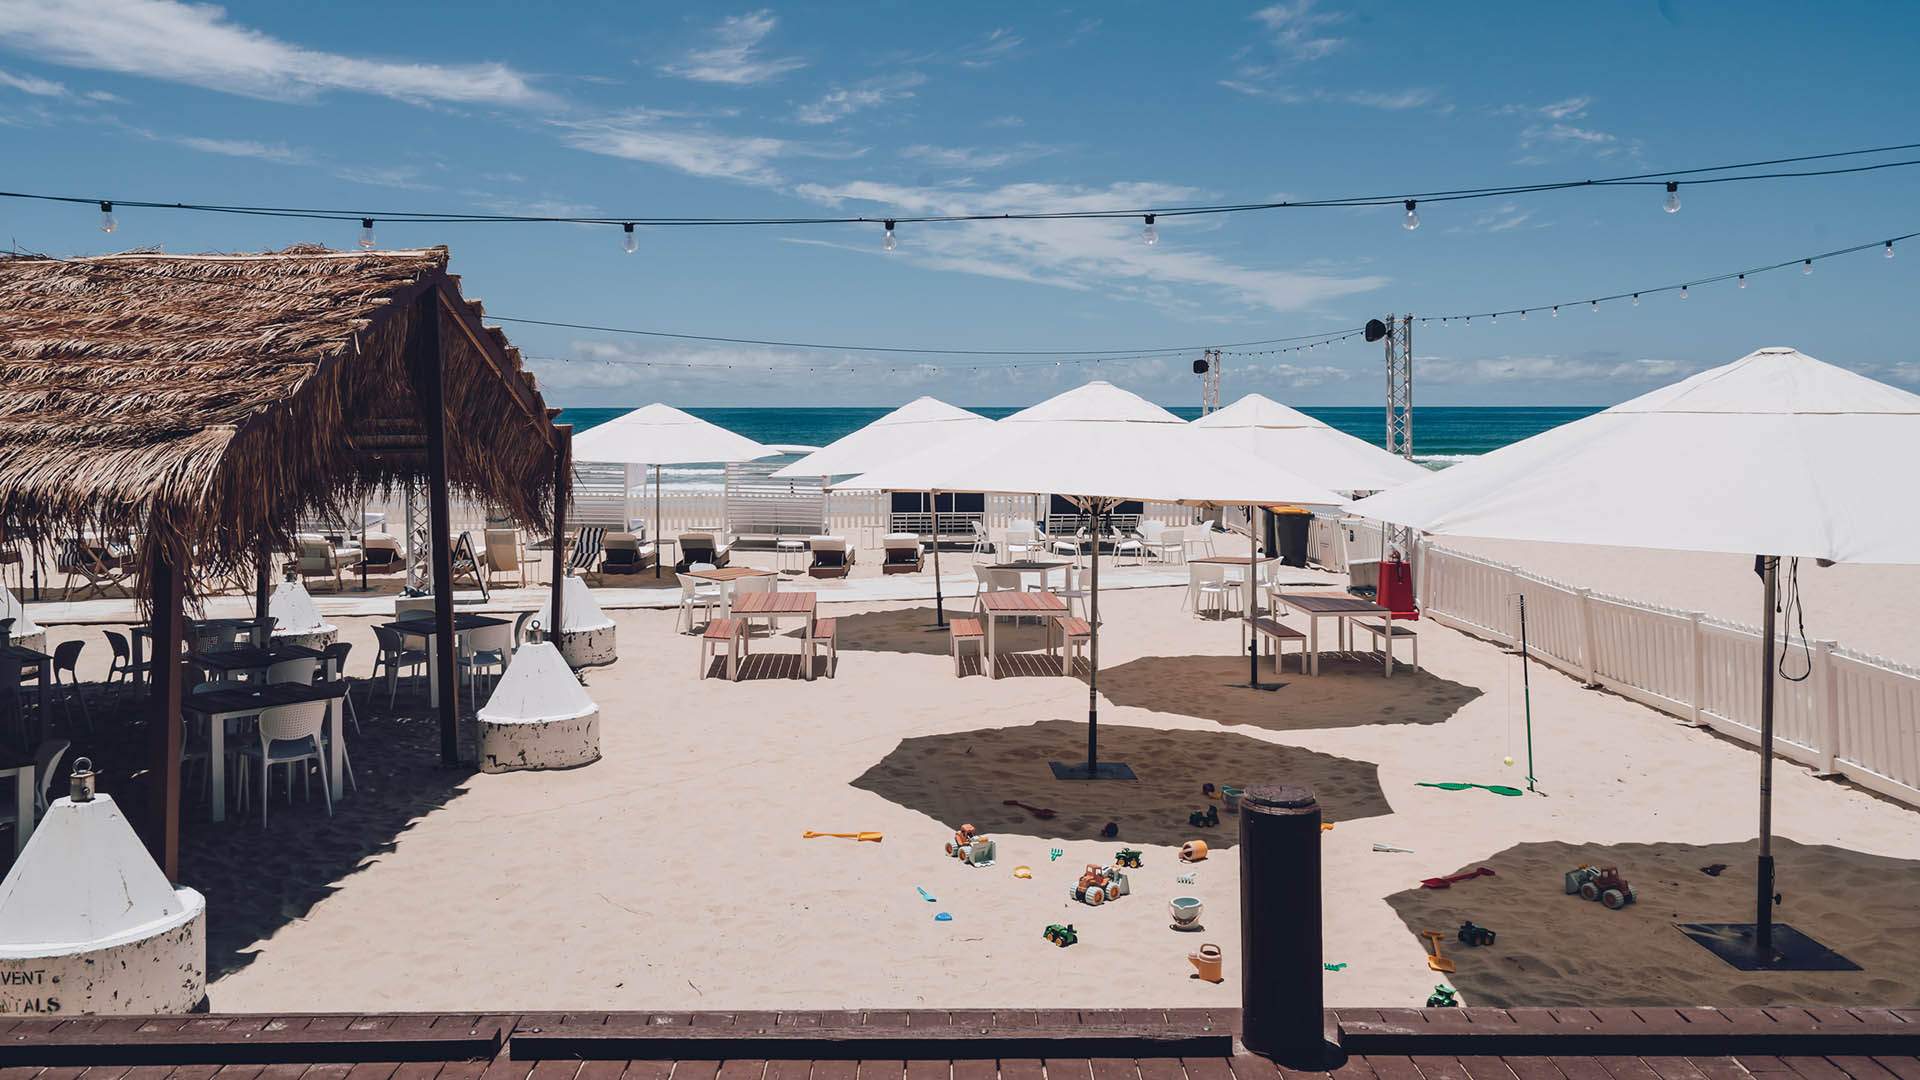 Kurrawa Beach Club Is Broadbeach's New Seaside Pop-Up with Cabanas, Daybeds and a Bar on the Sand